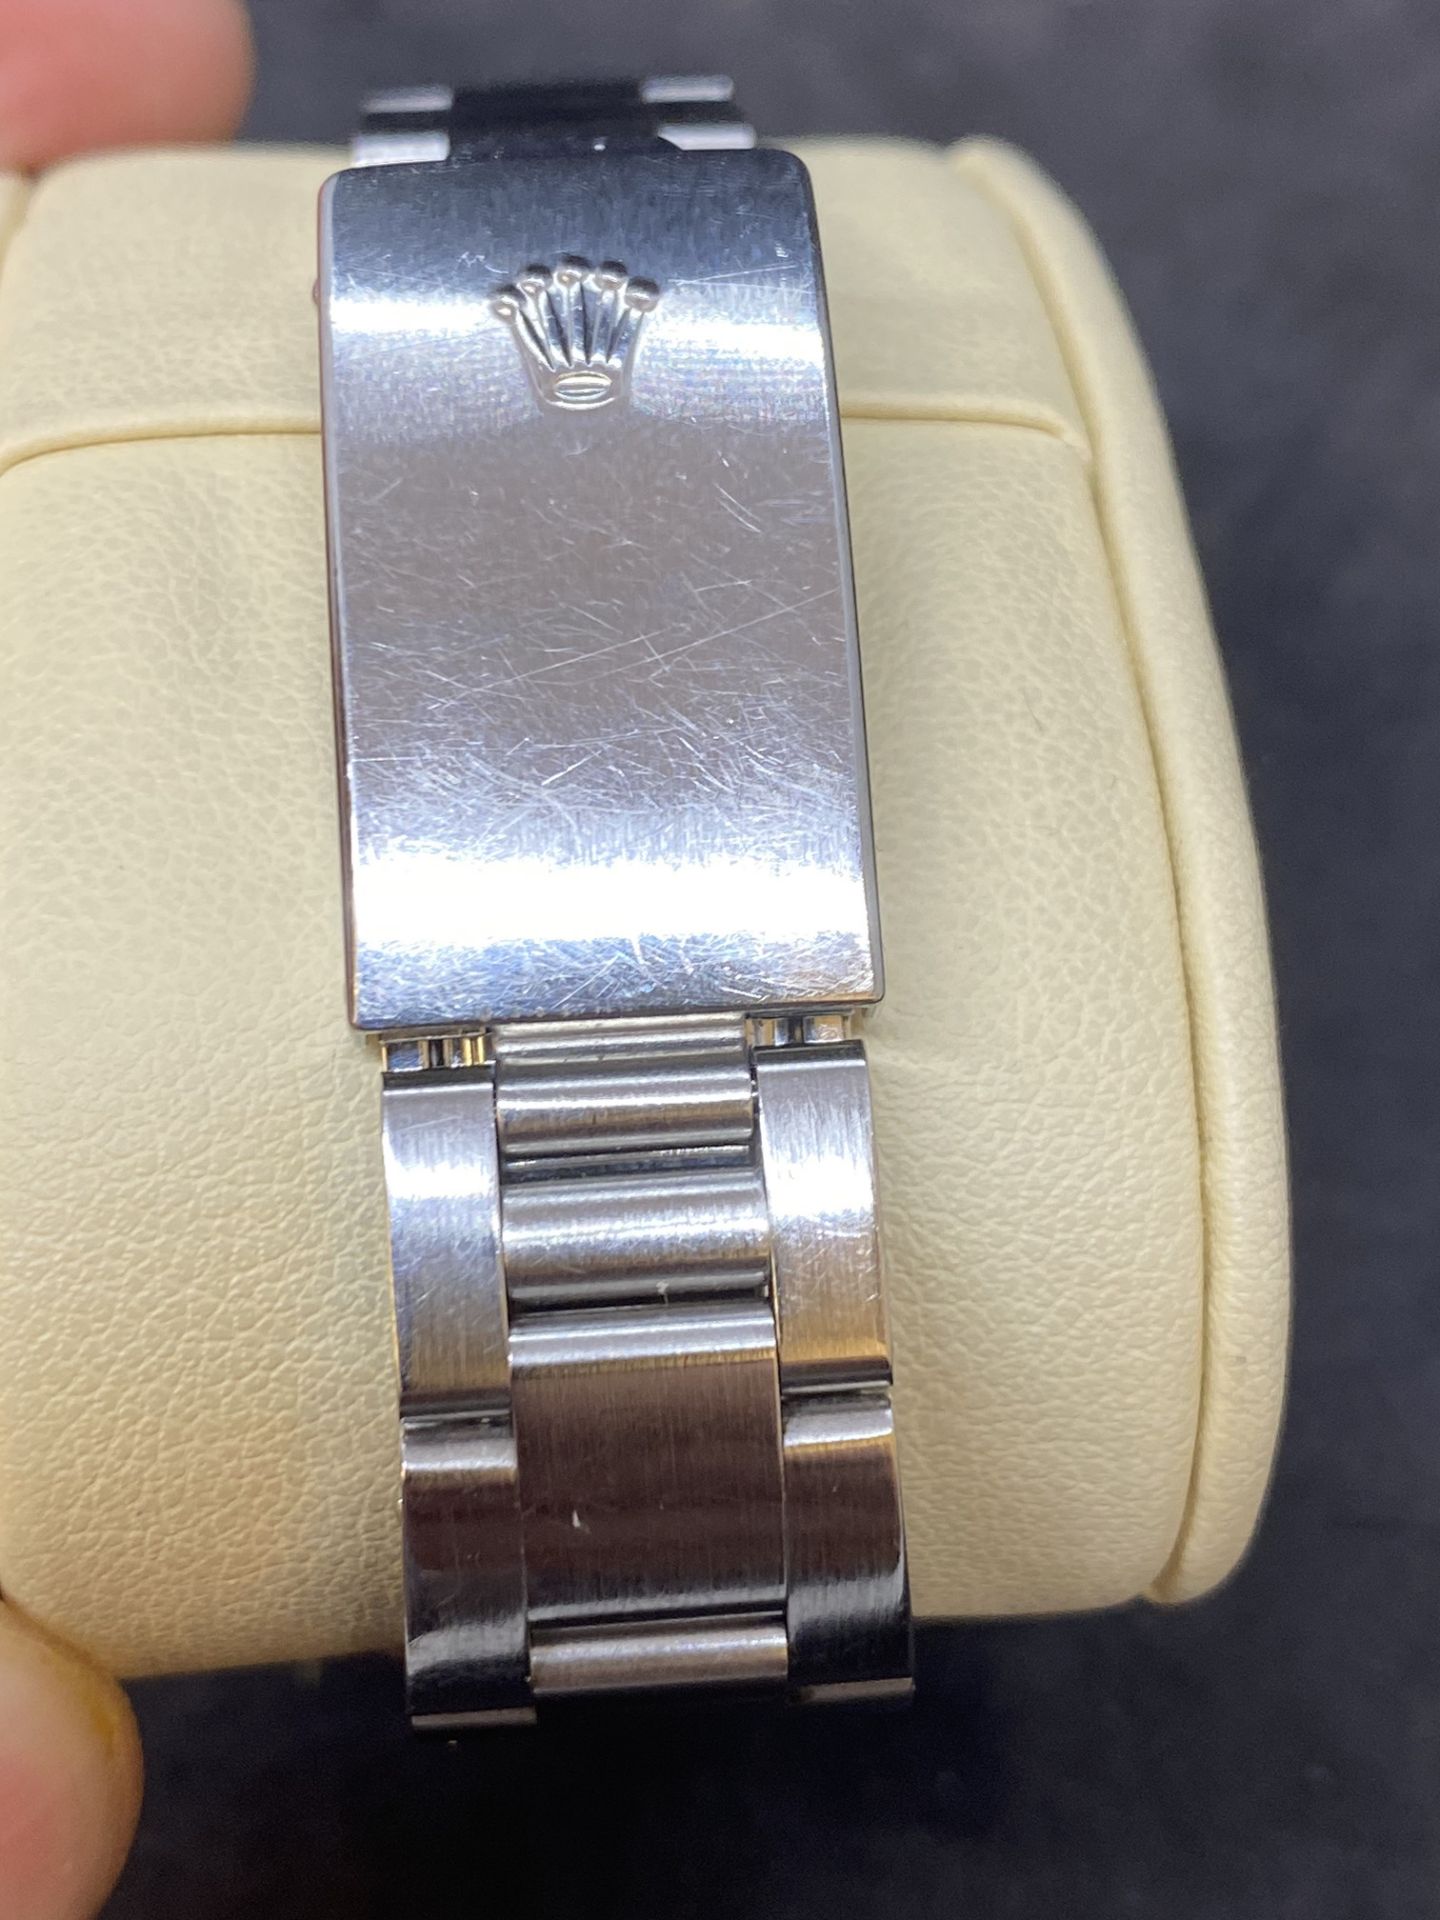 ROLEX OYSTER PERPETUAL DATE STAINLESS STEEL WATCH - Image 8 of 8